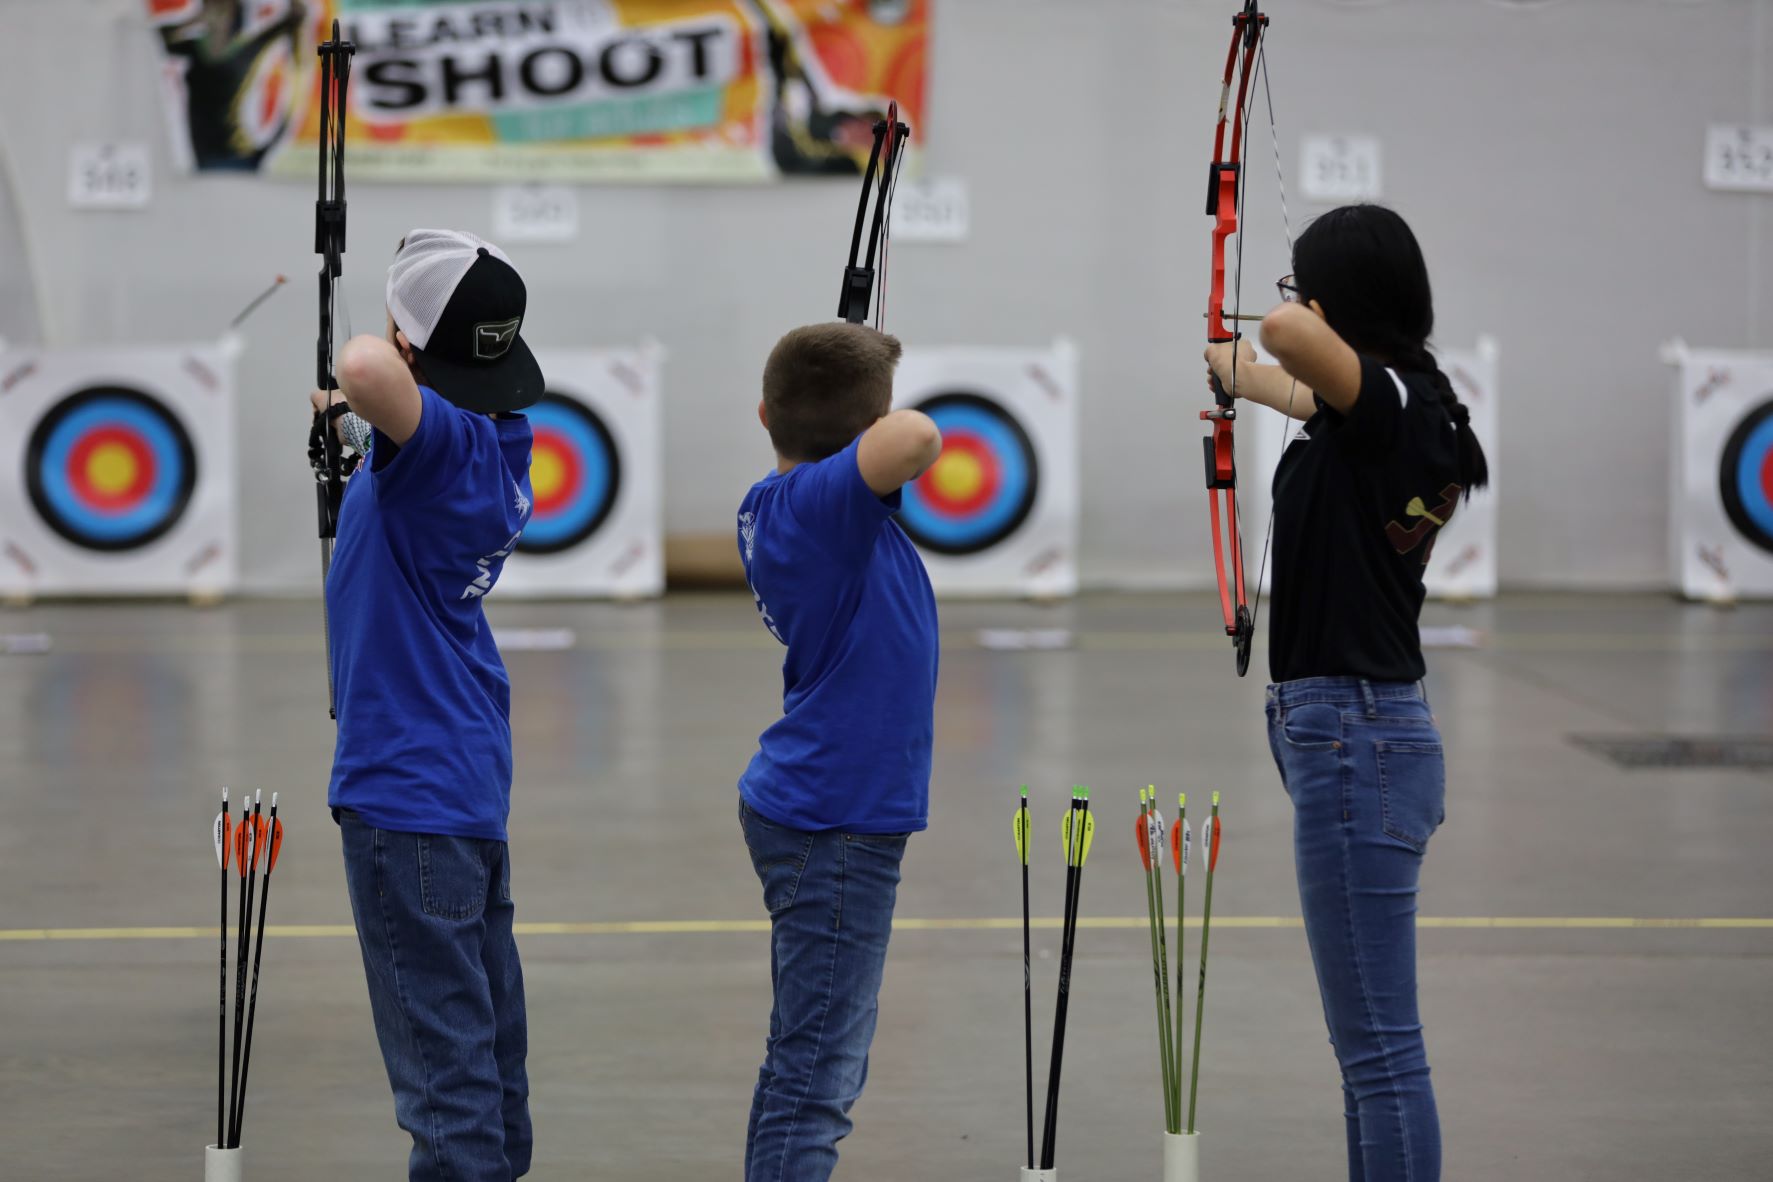 three students firing bows in an archery range